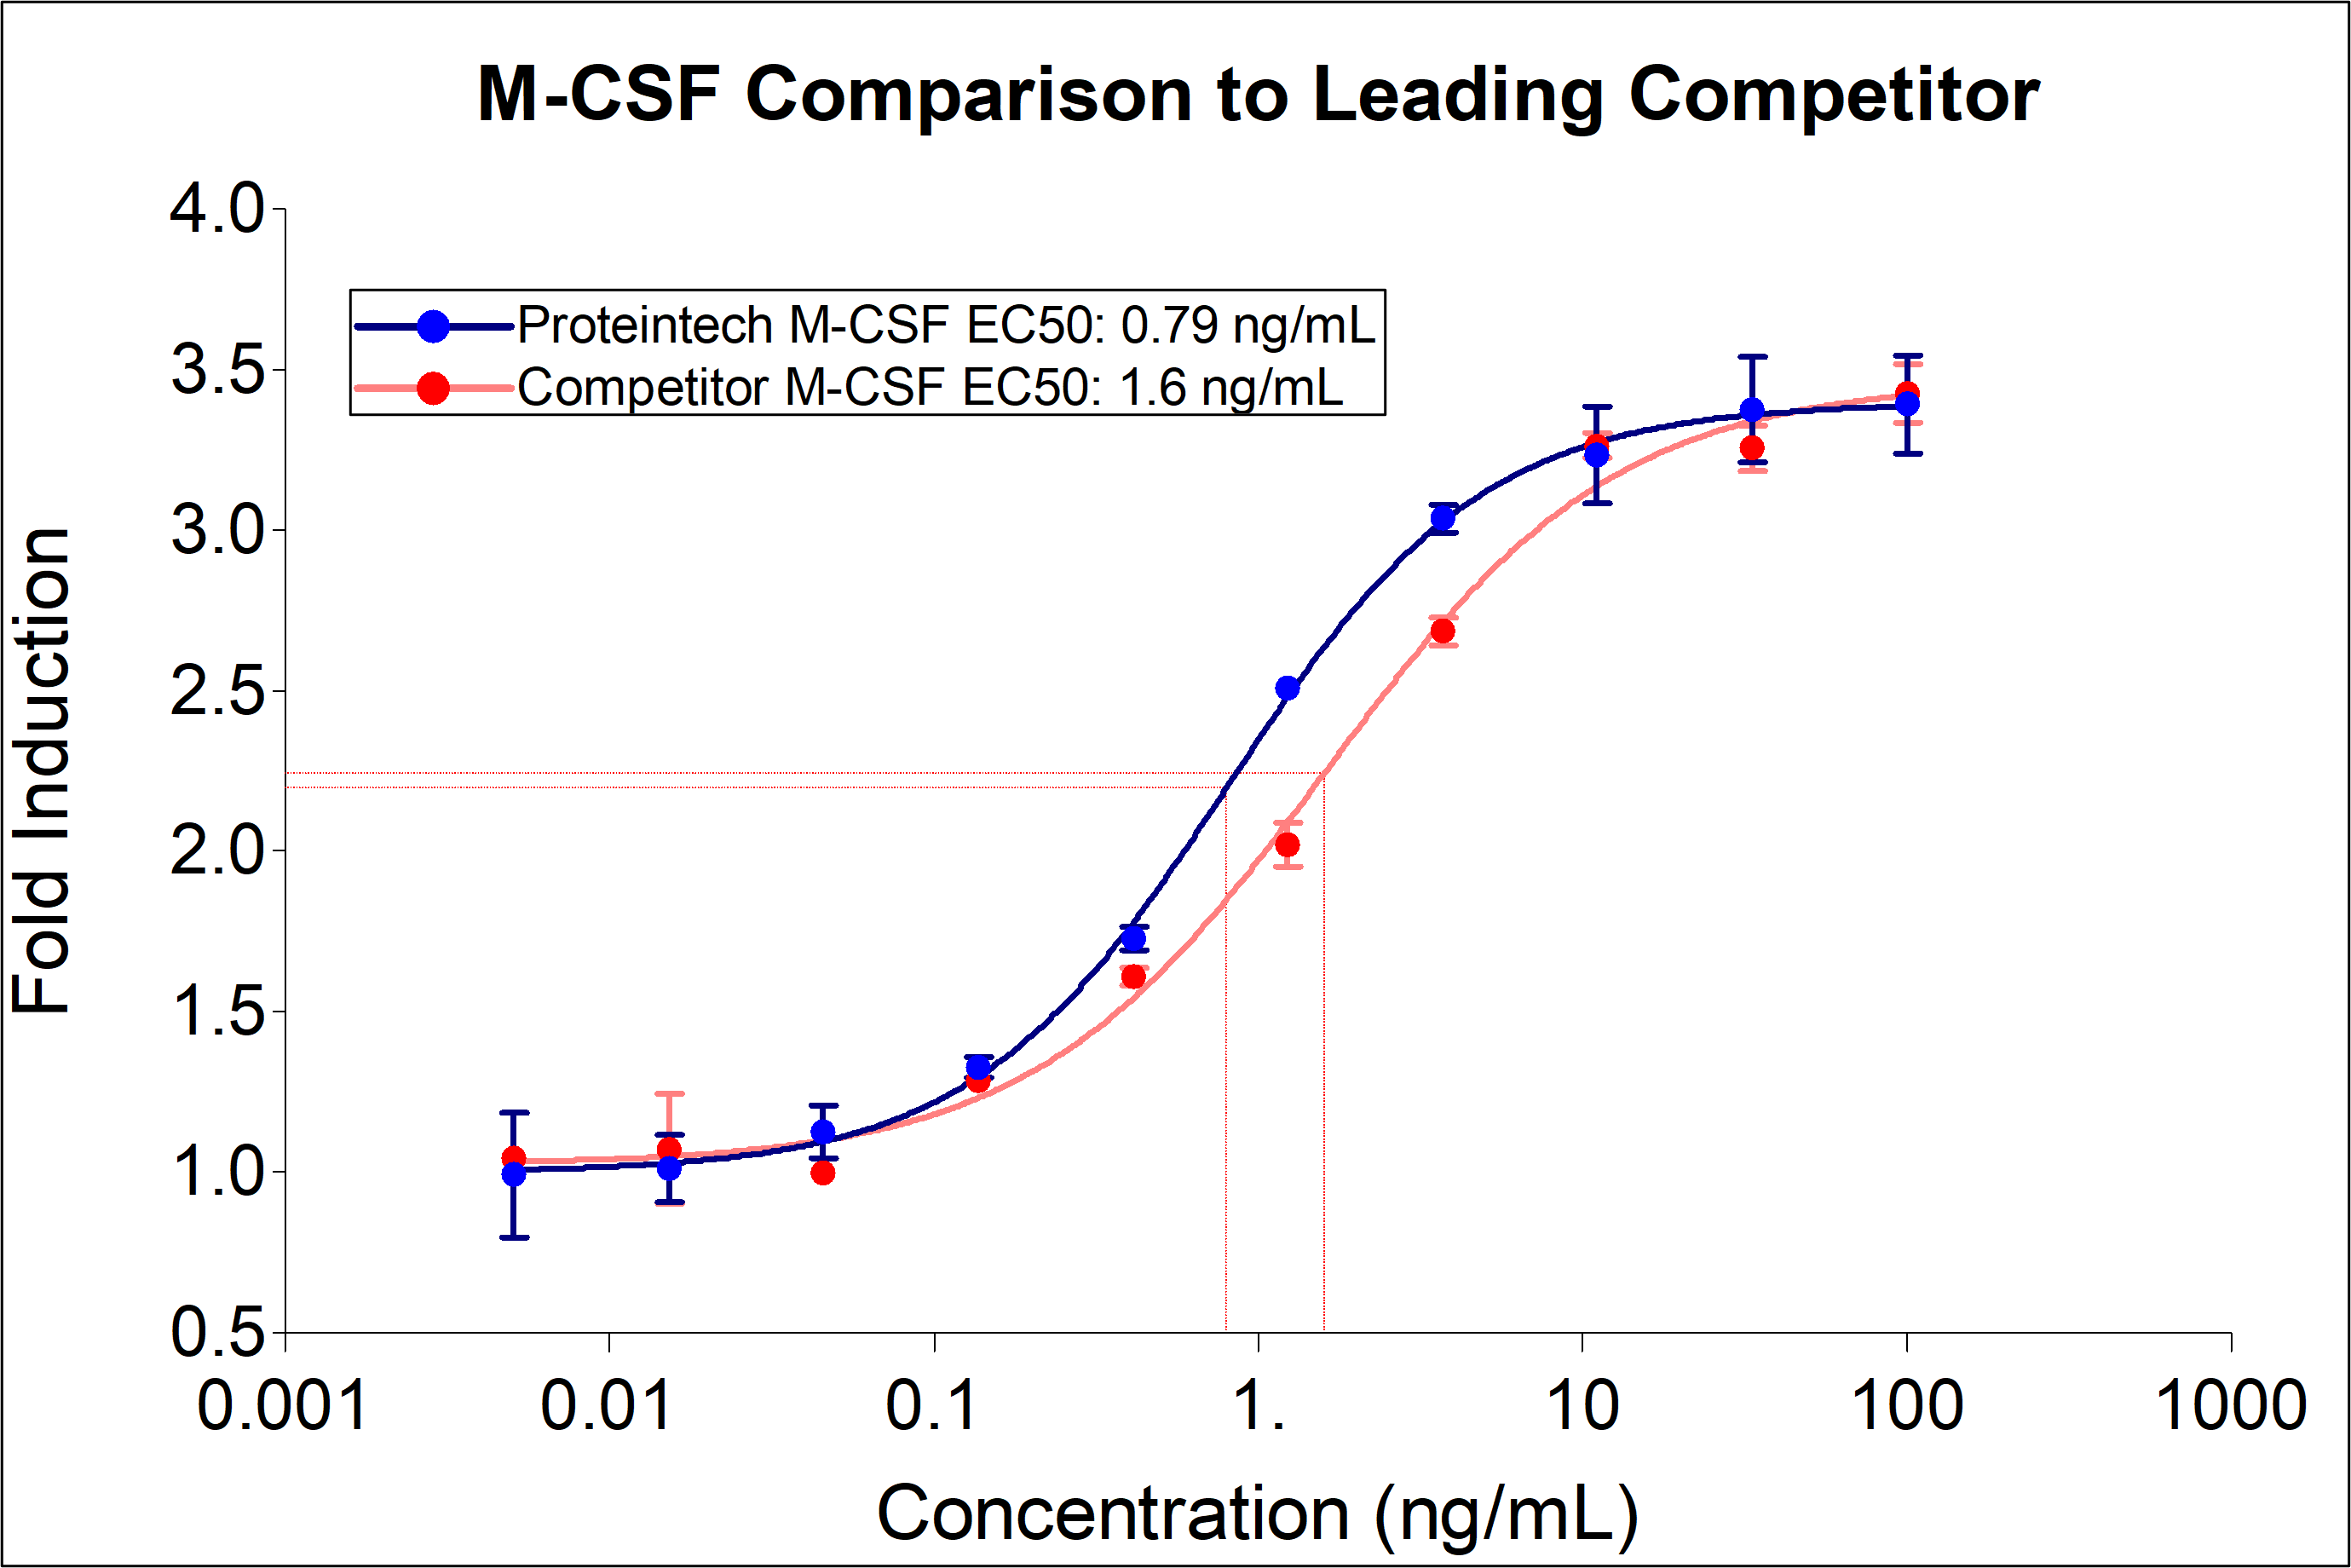 Proteintech M-CSF (Cat no: HZ-1192) demonstrates equivalent fold induction and a 2-fold better EC50 compared to leading competitors. Recombinant human M-CSF stimulates dose-dependent proliferation of the murine mouse myloid leukemia (M-NFS-60) cell line. Cell number was quantitatively assessed by Prestoblue® Cell Viability Reagent. M-NFS-60 cells were treated with increasing concentrations of recombinant M-CSF for 48 hours. The EC50 range is 0.7-4.0 ng/mL.
